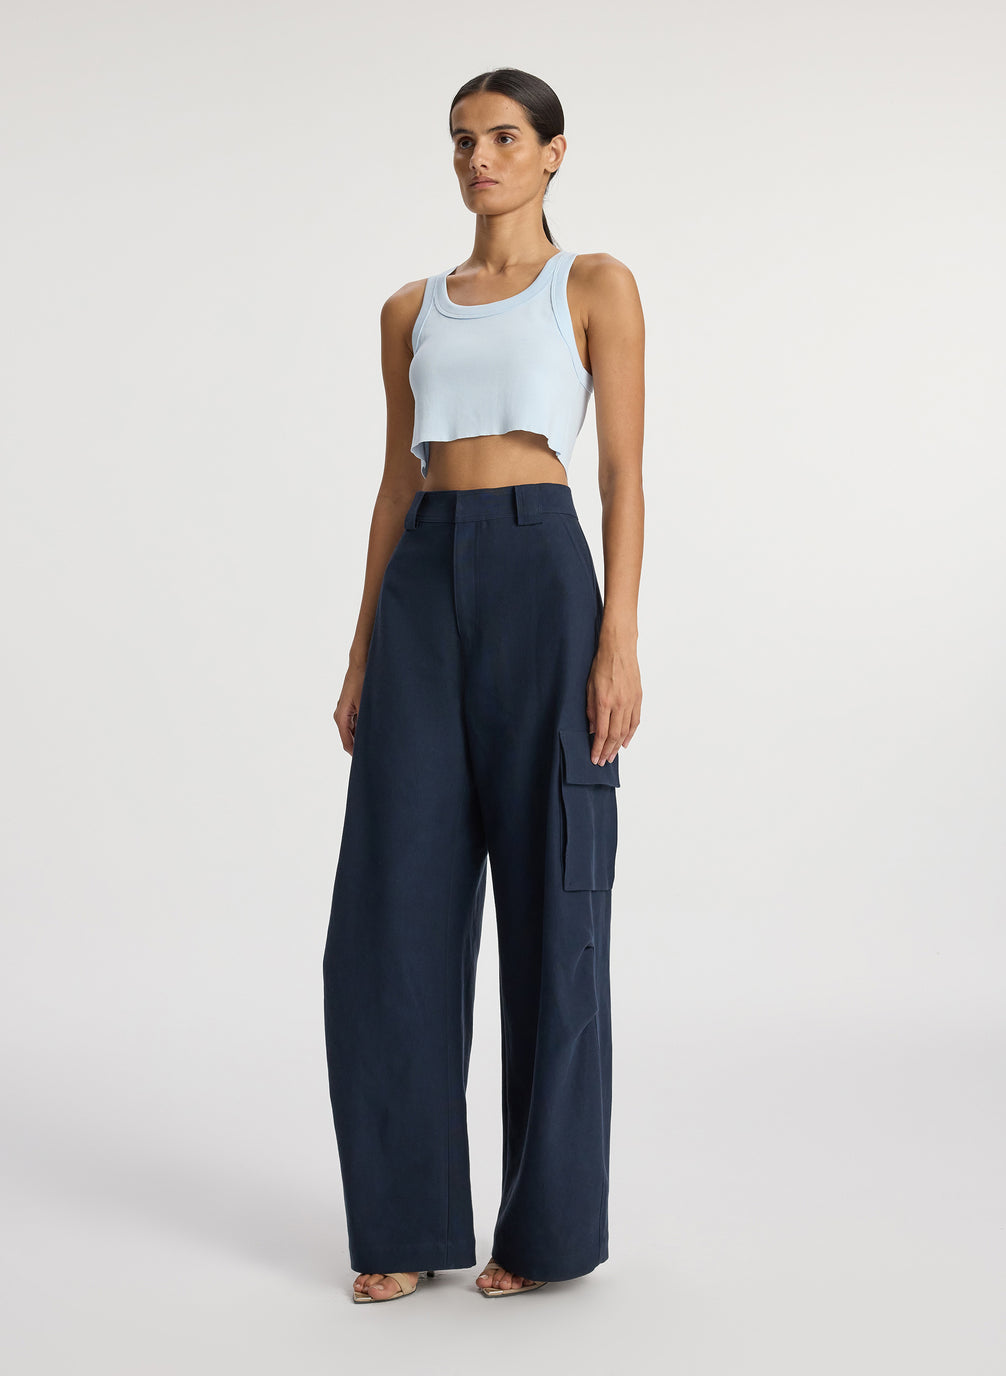 side view of woman wearing light blue cropped rib tank top and navy blue cargo pants